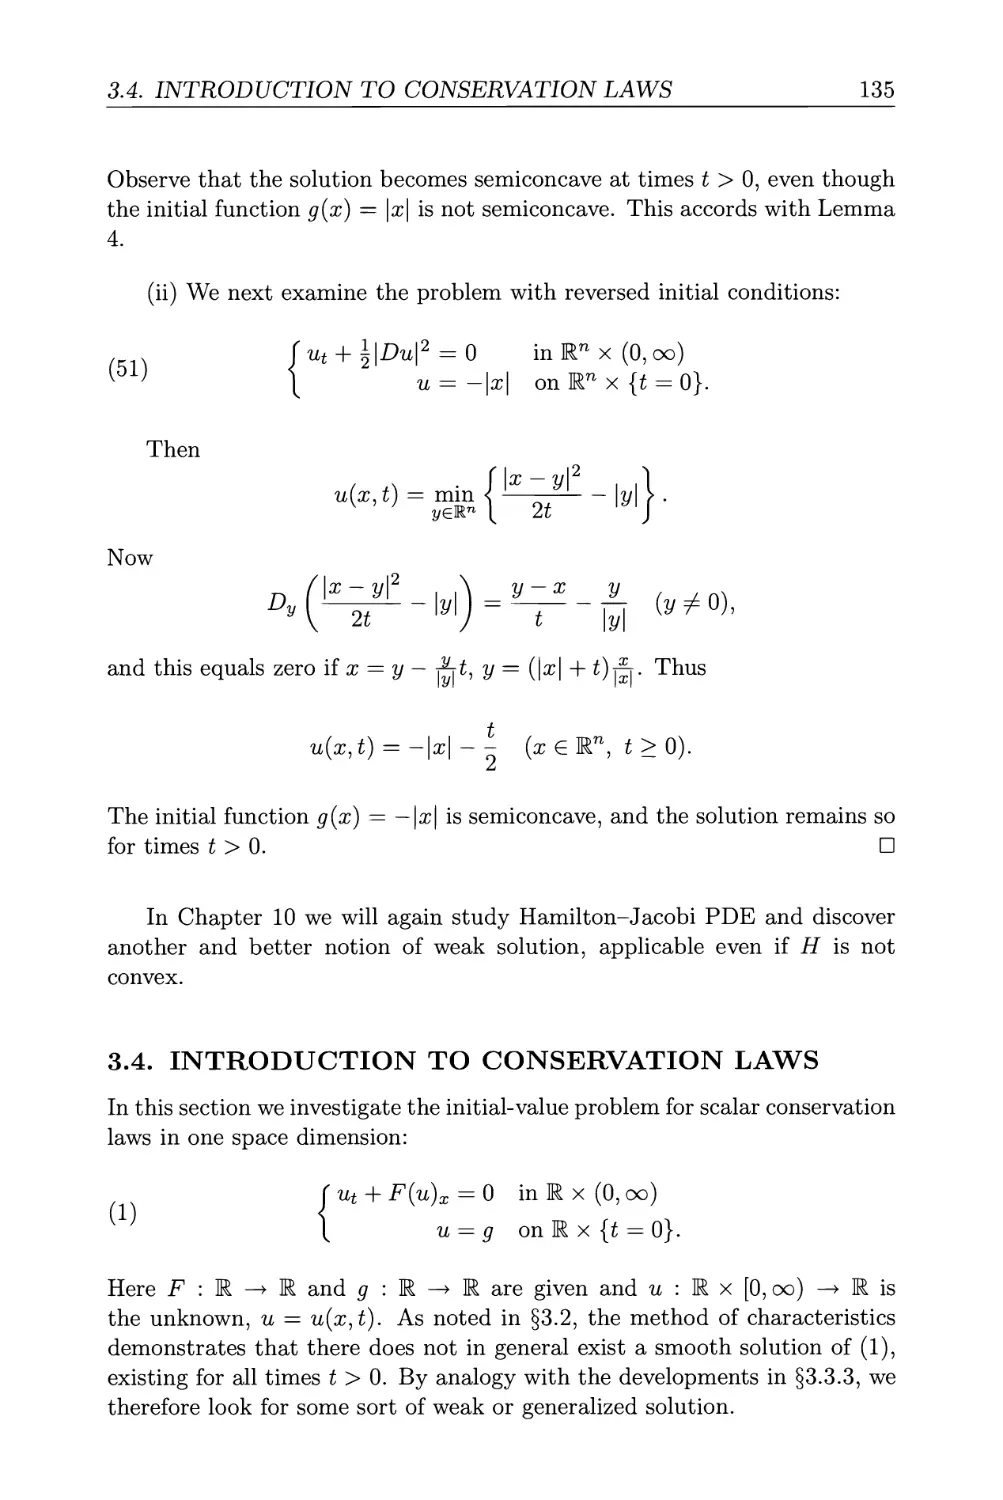 3.4. Introduction to conservation laws